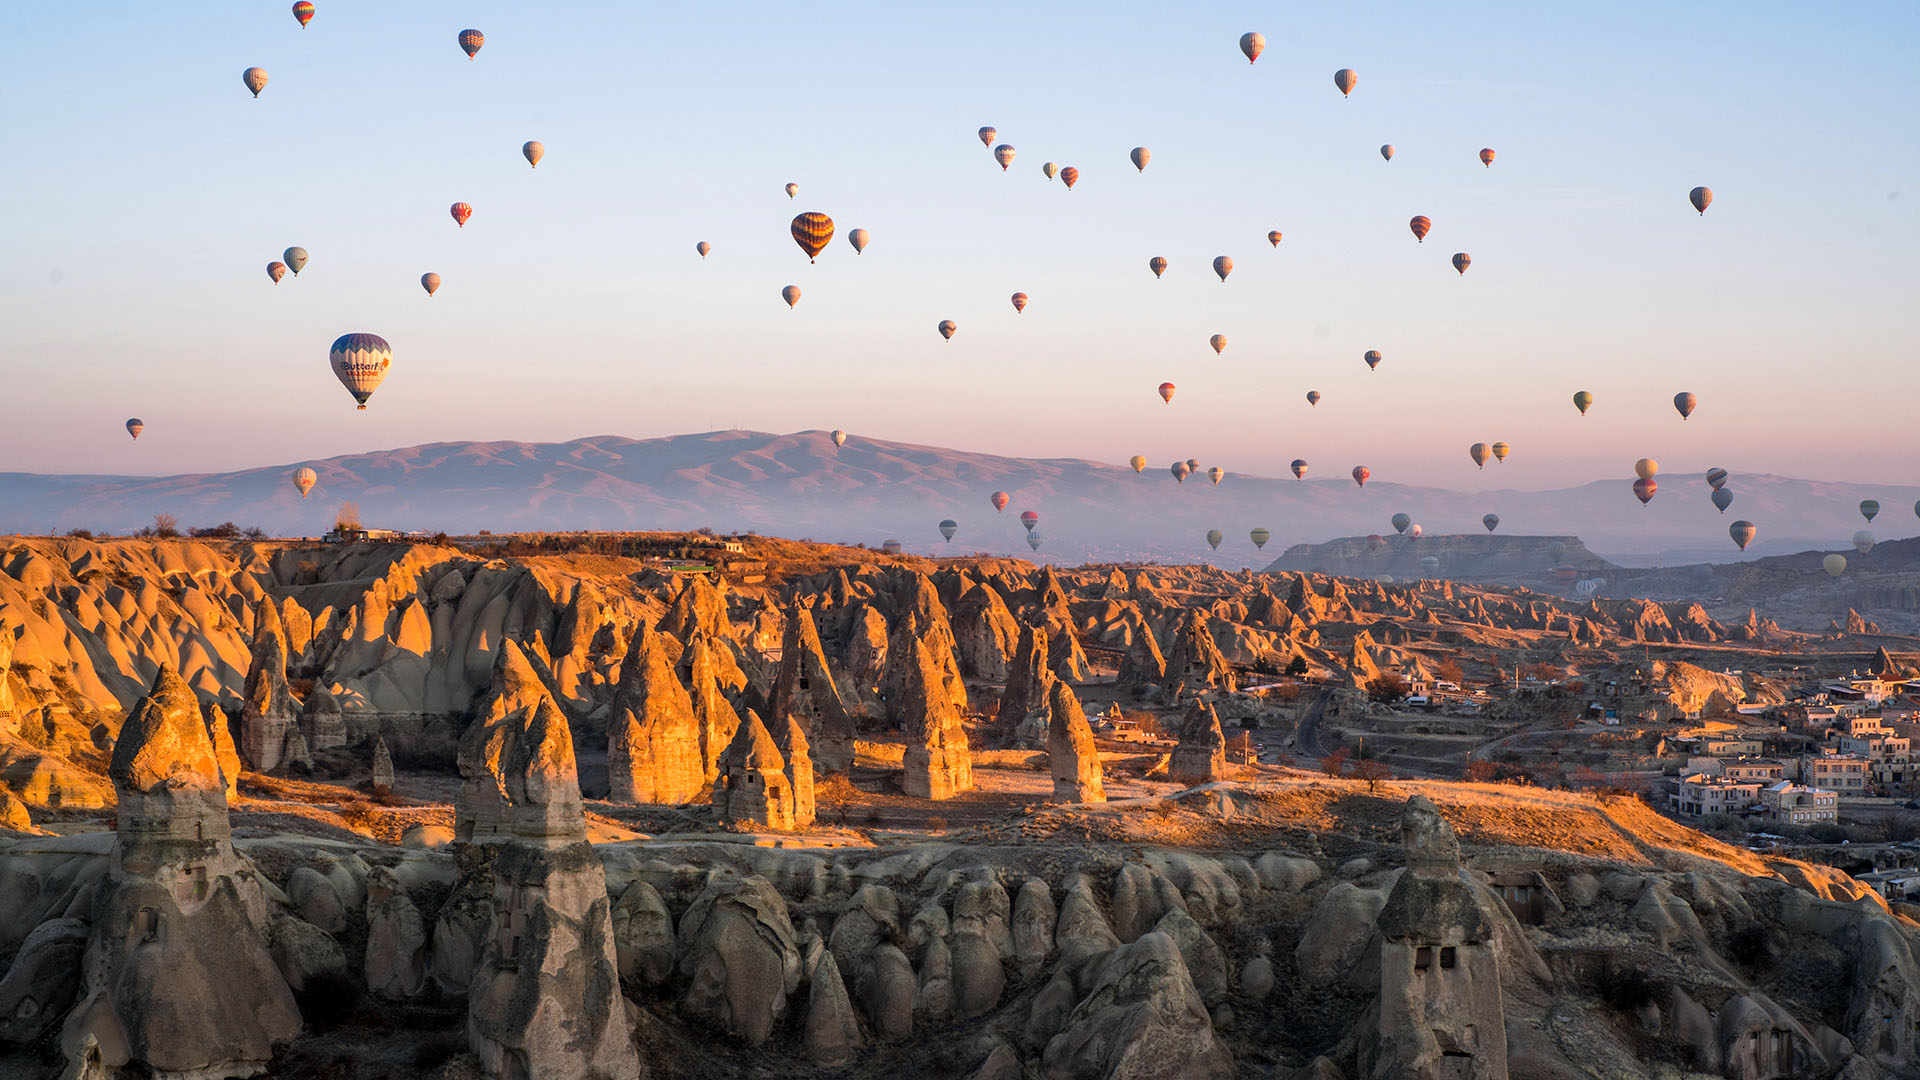 Eroded and volcanic-like terrain with hot air balloons in the sky